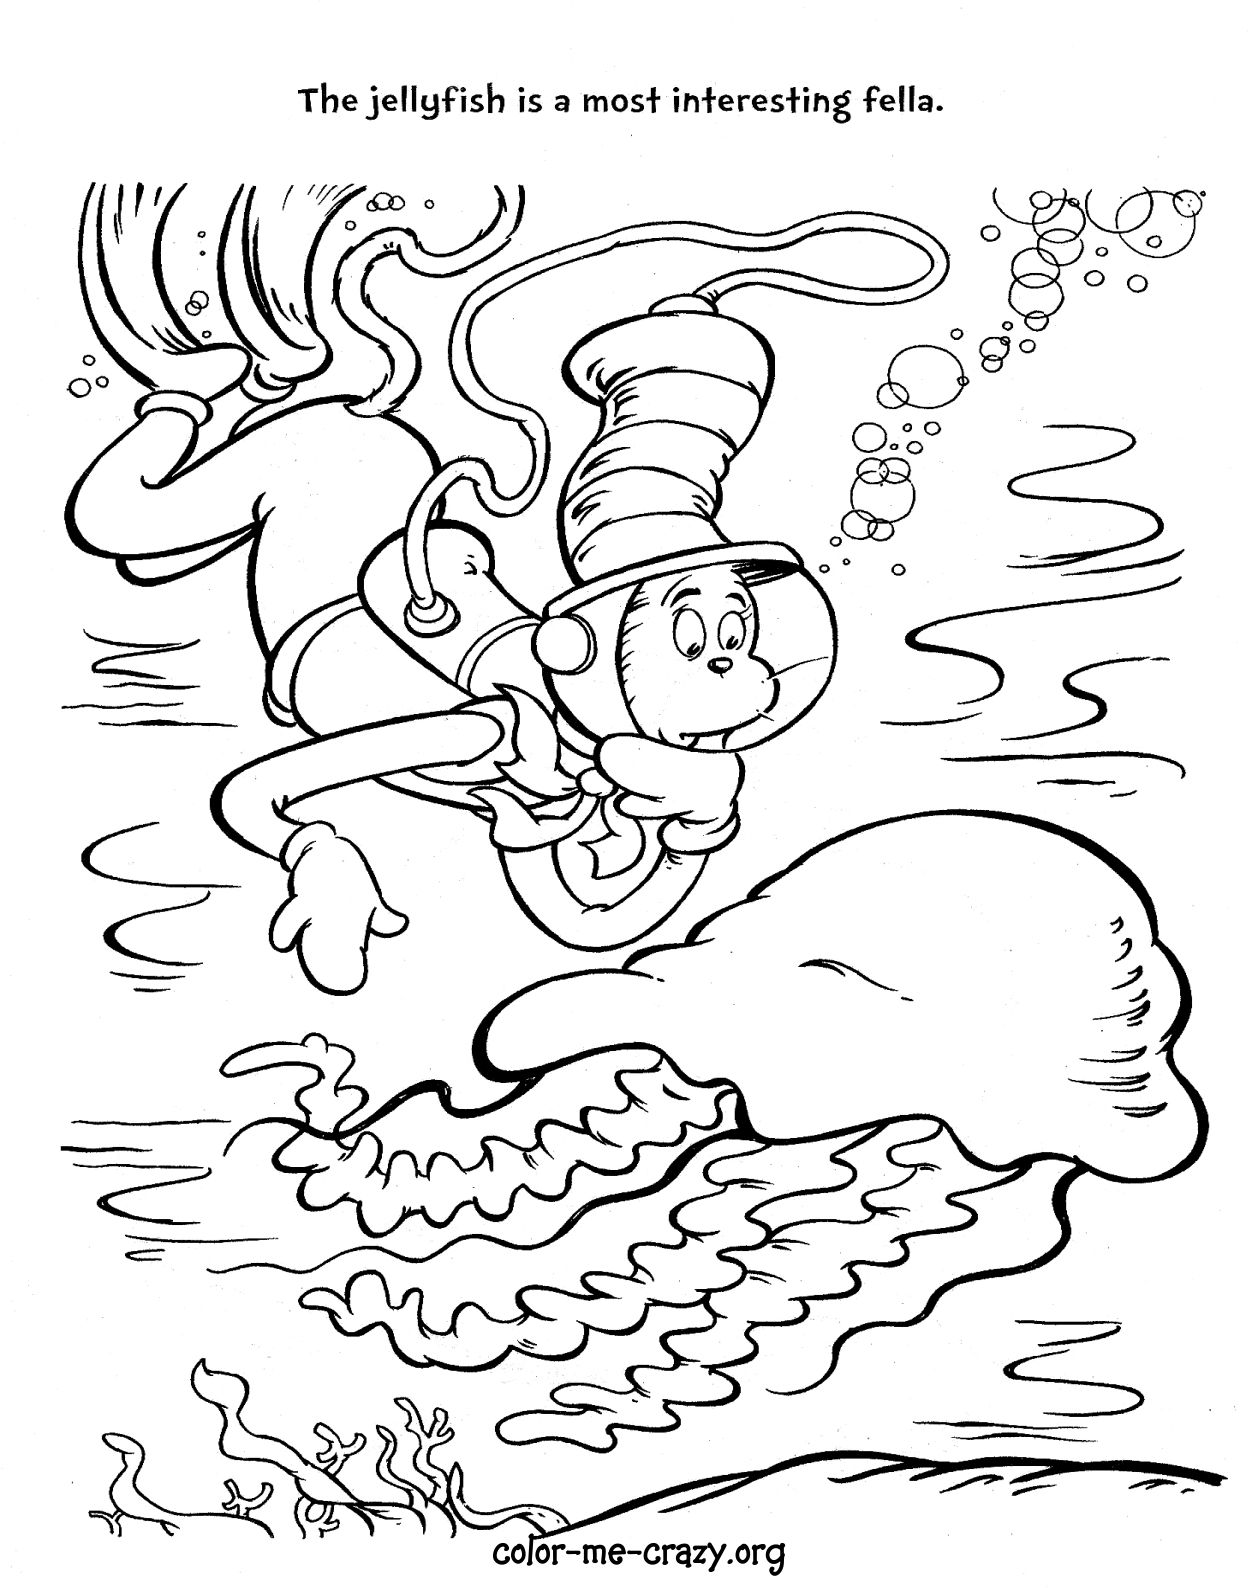 Cat In The Hat Coloring Pages - GetColoringPages.com